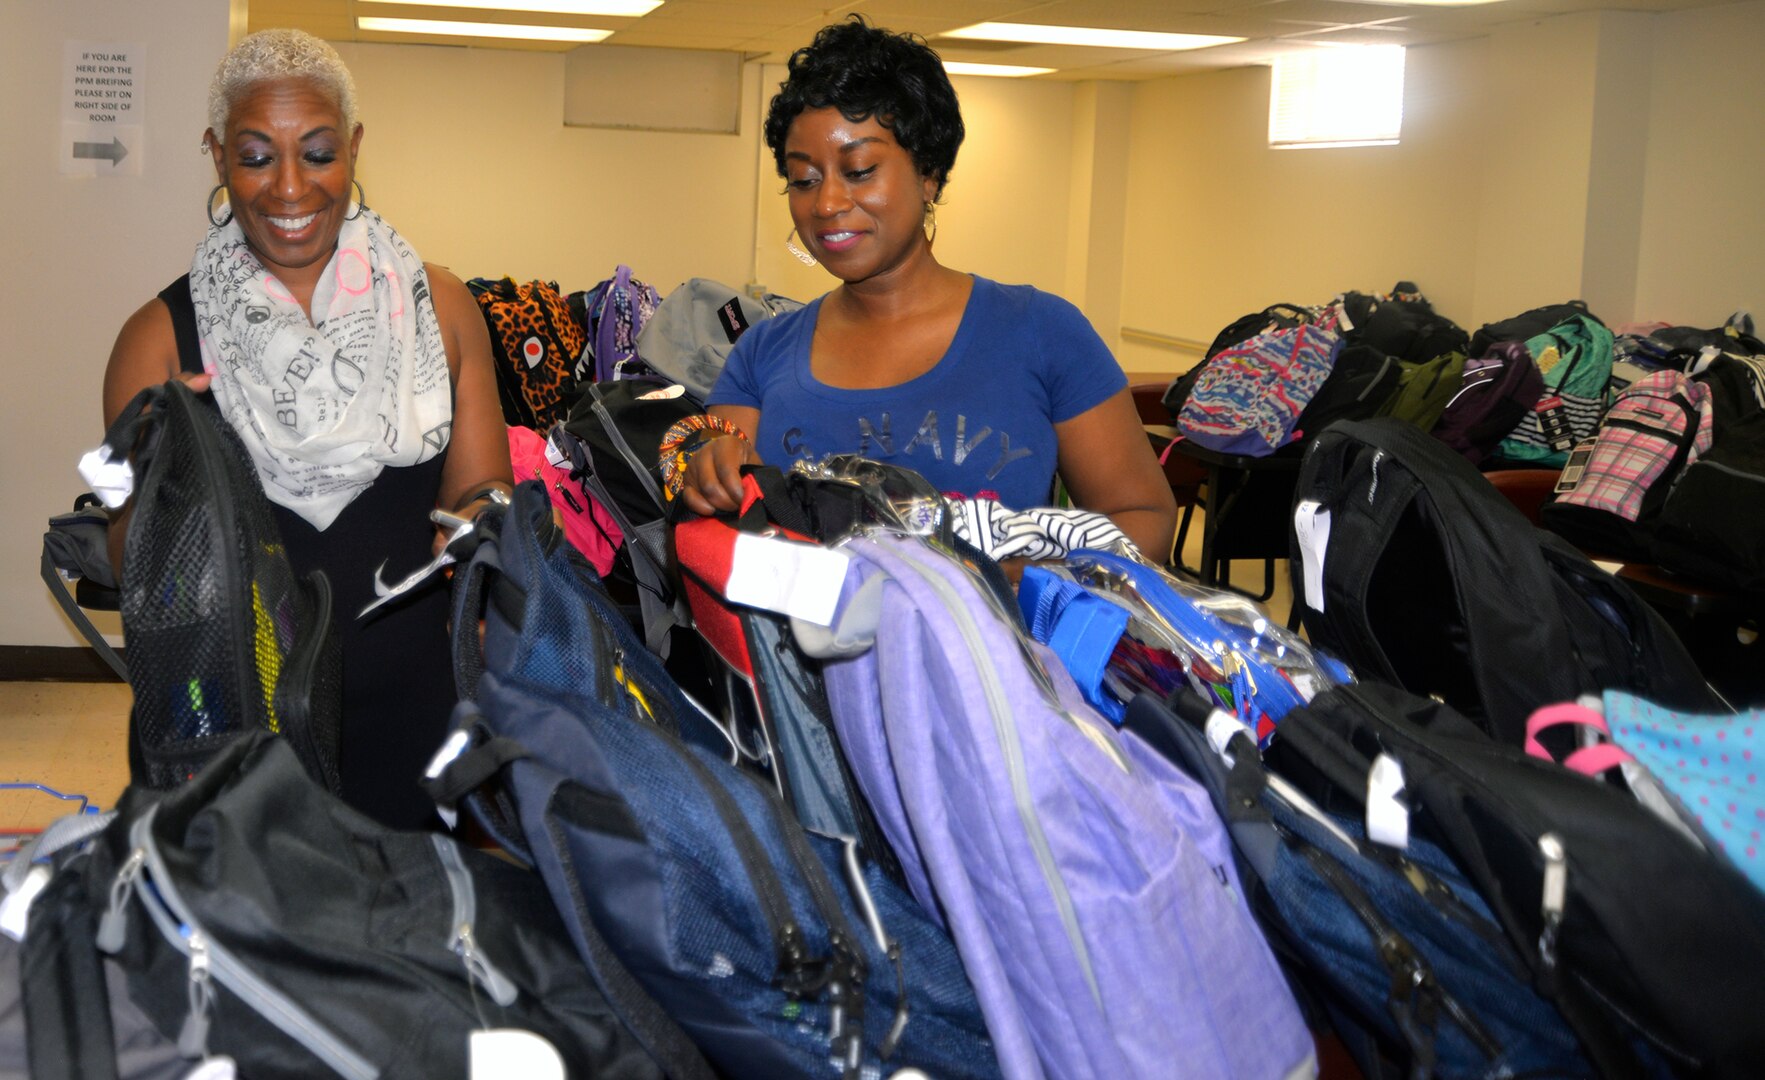 Nita-Ford Hightower (left) and Quiana Abner (right), Joint Base San Antonio-Fort Sam Houston Military Child Education Program school liaison officers, sort through donated backpacks filled with school supplies collected through the eighth annual Build-A-Backpack Program drive Aug. 9. The program, sponsored by the JBSA Military Child Education Program-School Liaison Office, provides backpacks and school supplies for schoolchildren of military families, including active duty and wounded service members and Guard and Reserve personnel. This year, the program provided backpacks for 1,420 JBSA schoolchildren.